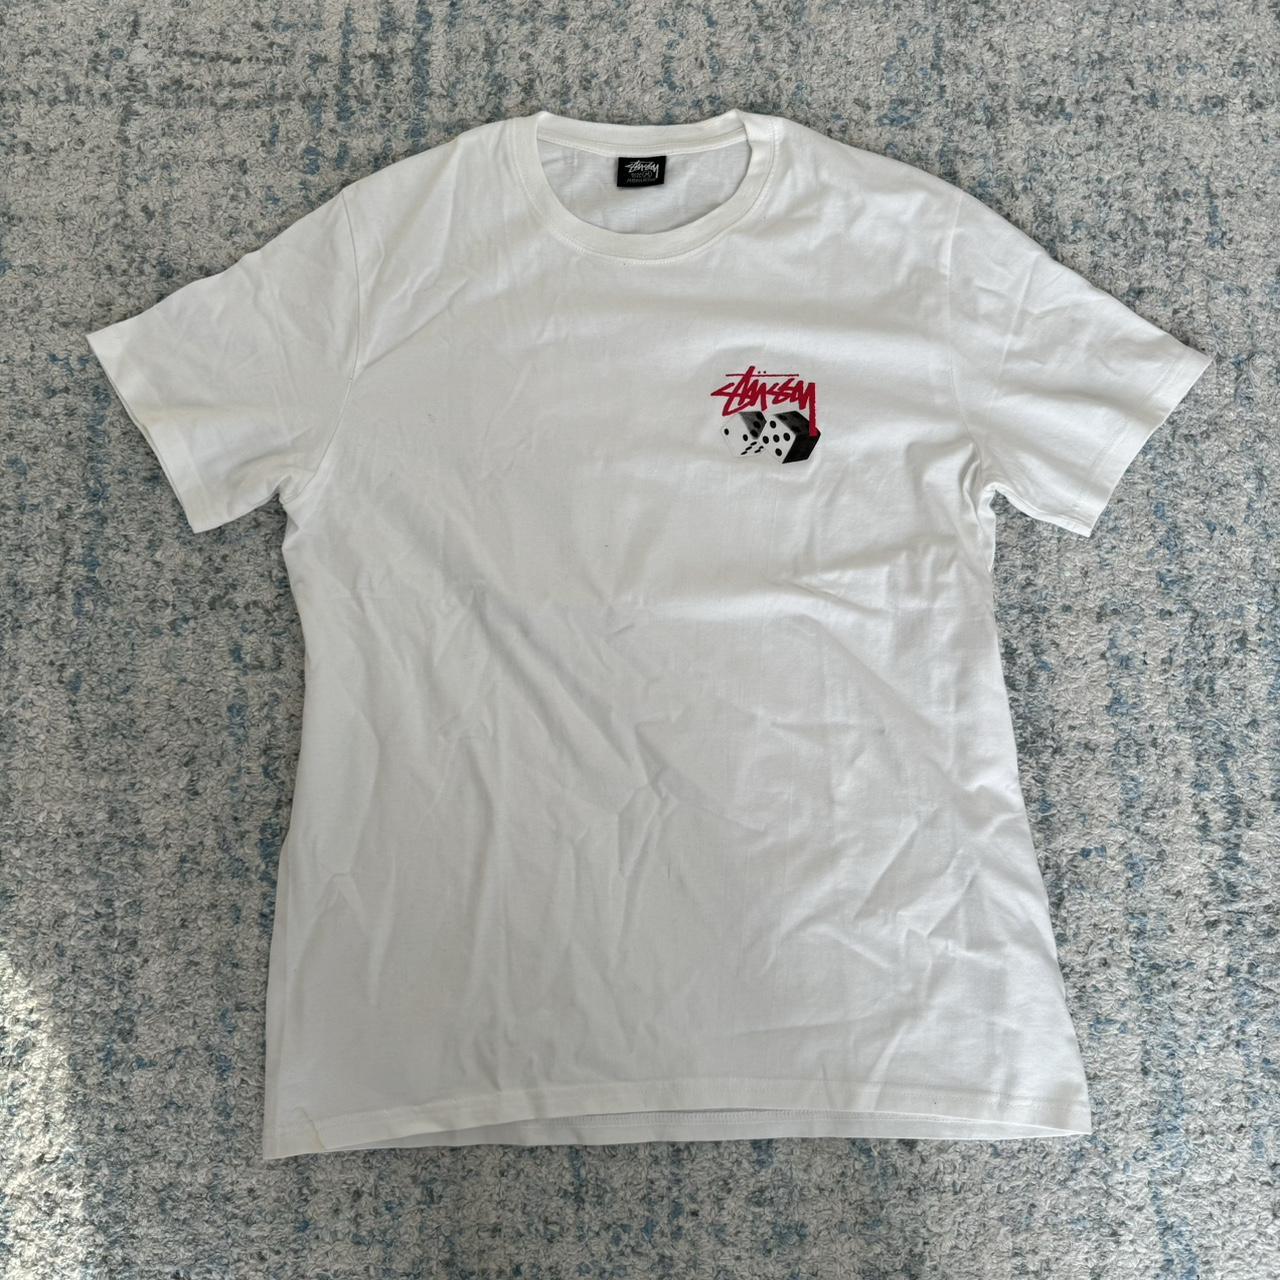 Stussy Hanging Dice tee Size M Condition 9/10 - Depop